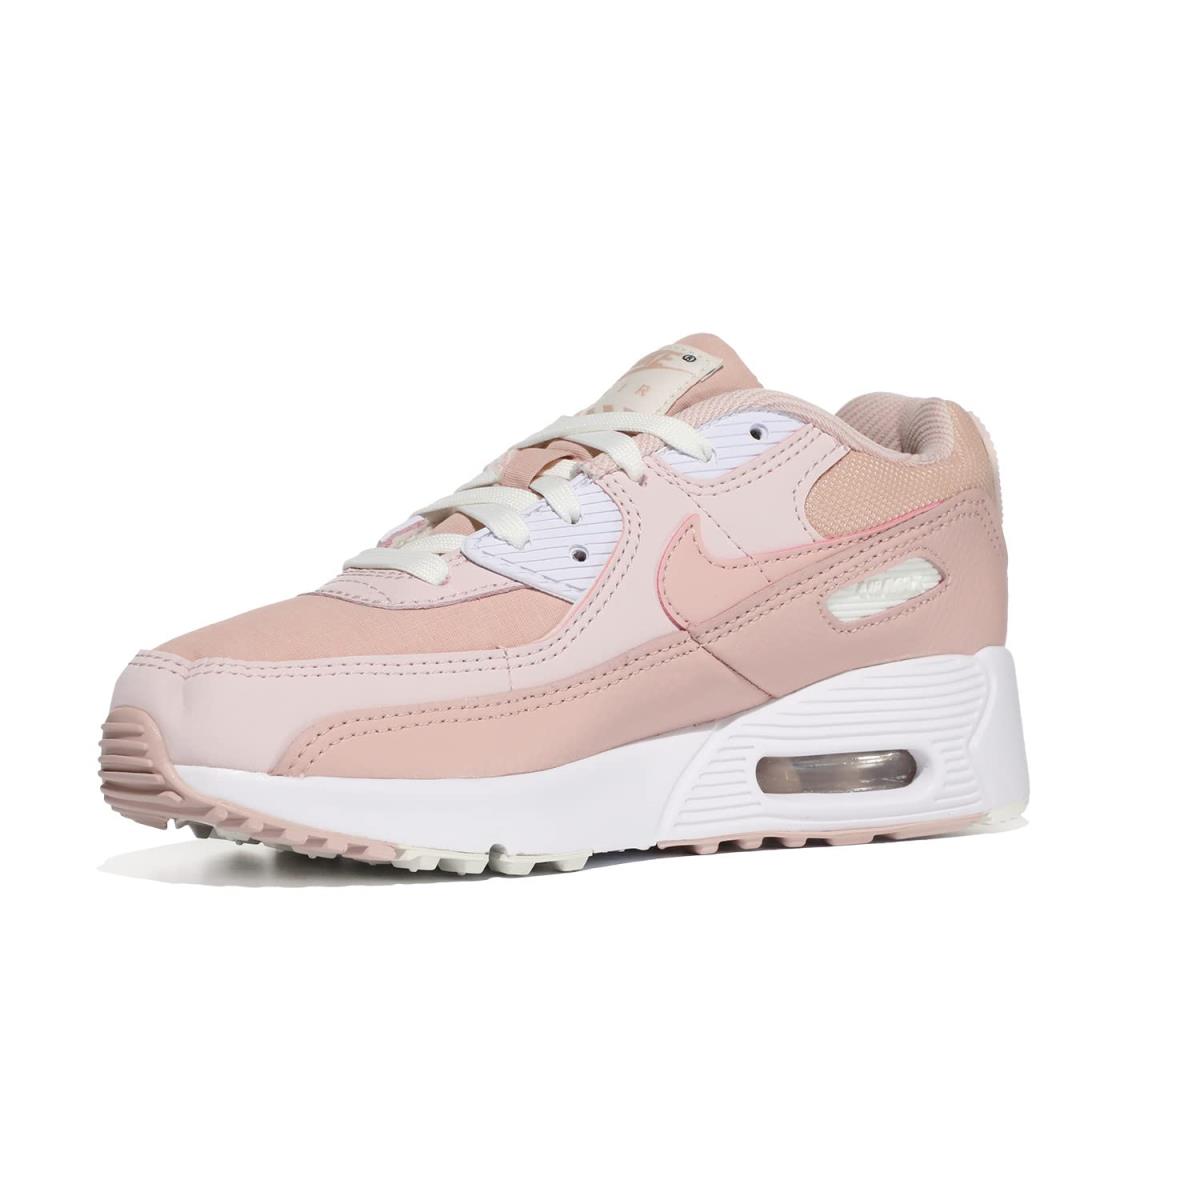 Boy`s Sneakers Athletic Shoes Nike Kids Air Max 90 Ltr Little Kid Pink Oxford/Summit White/Barely Rose